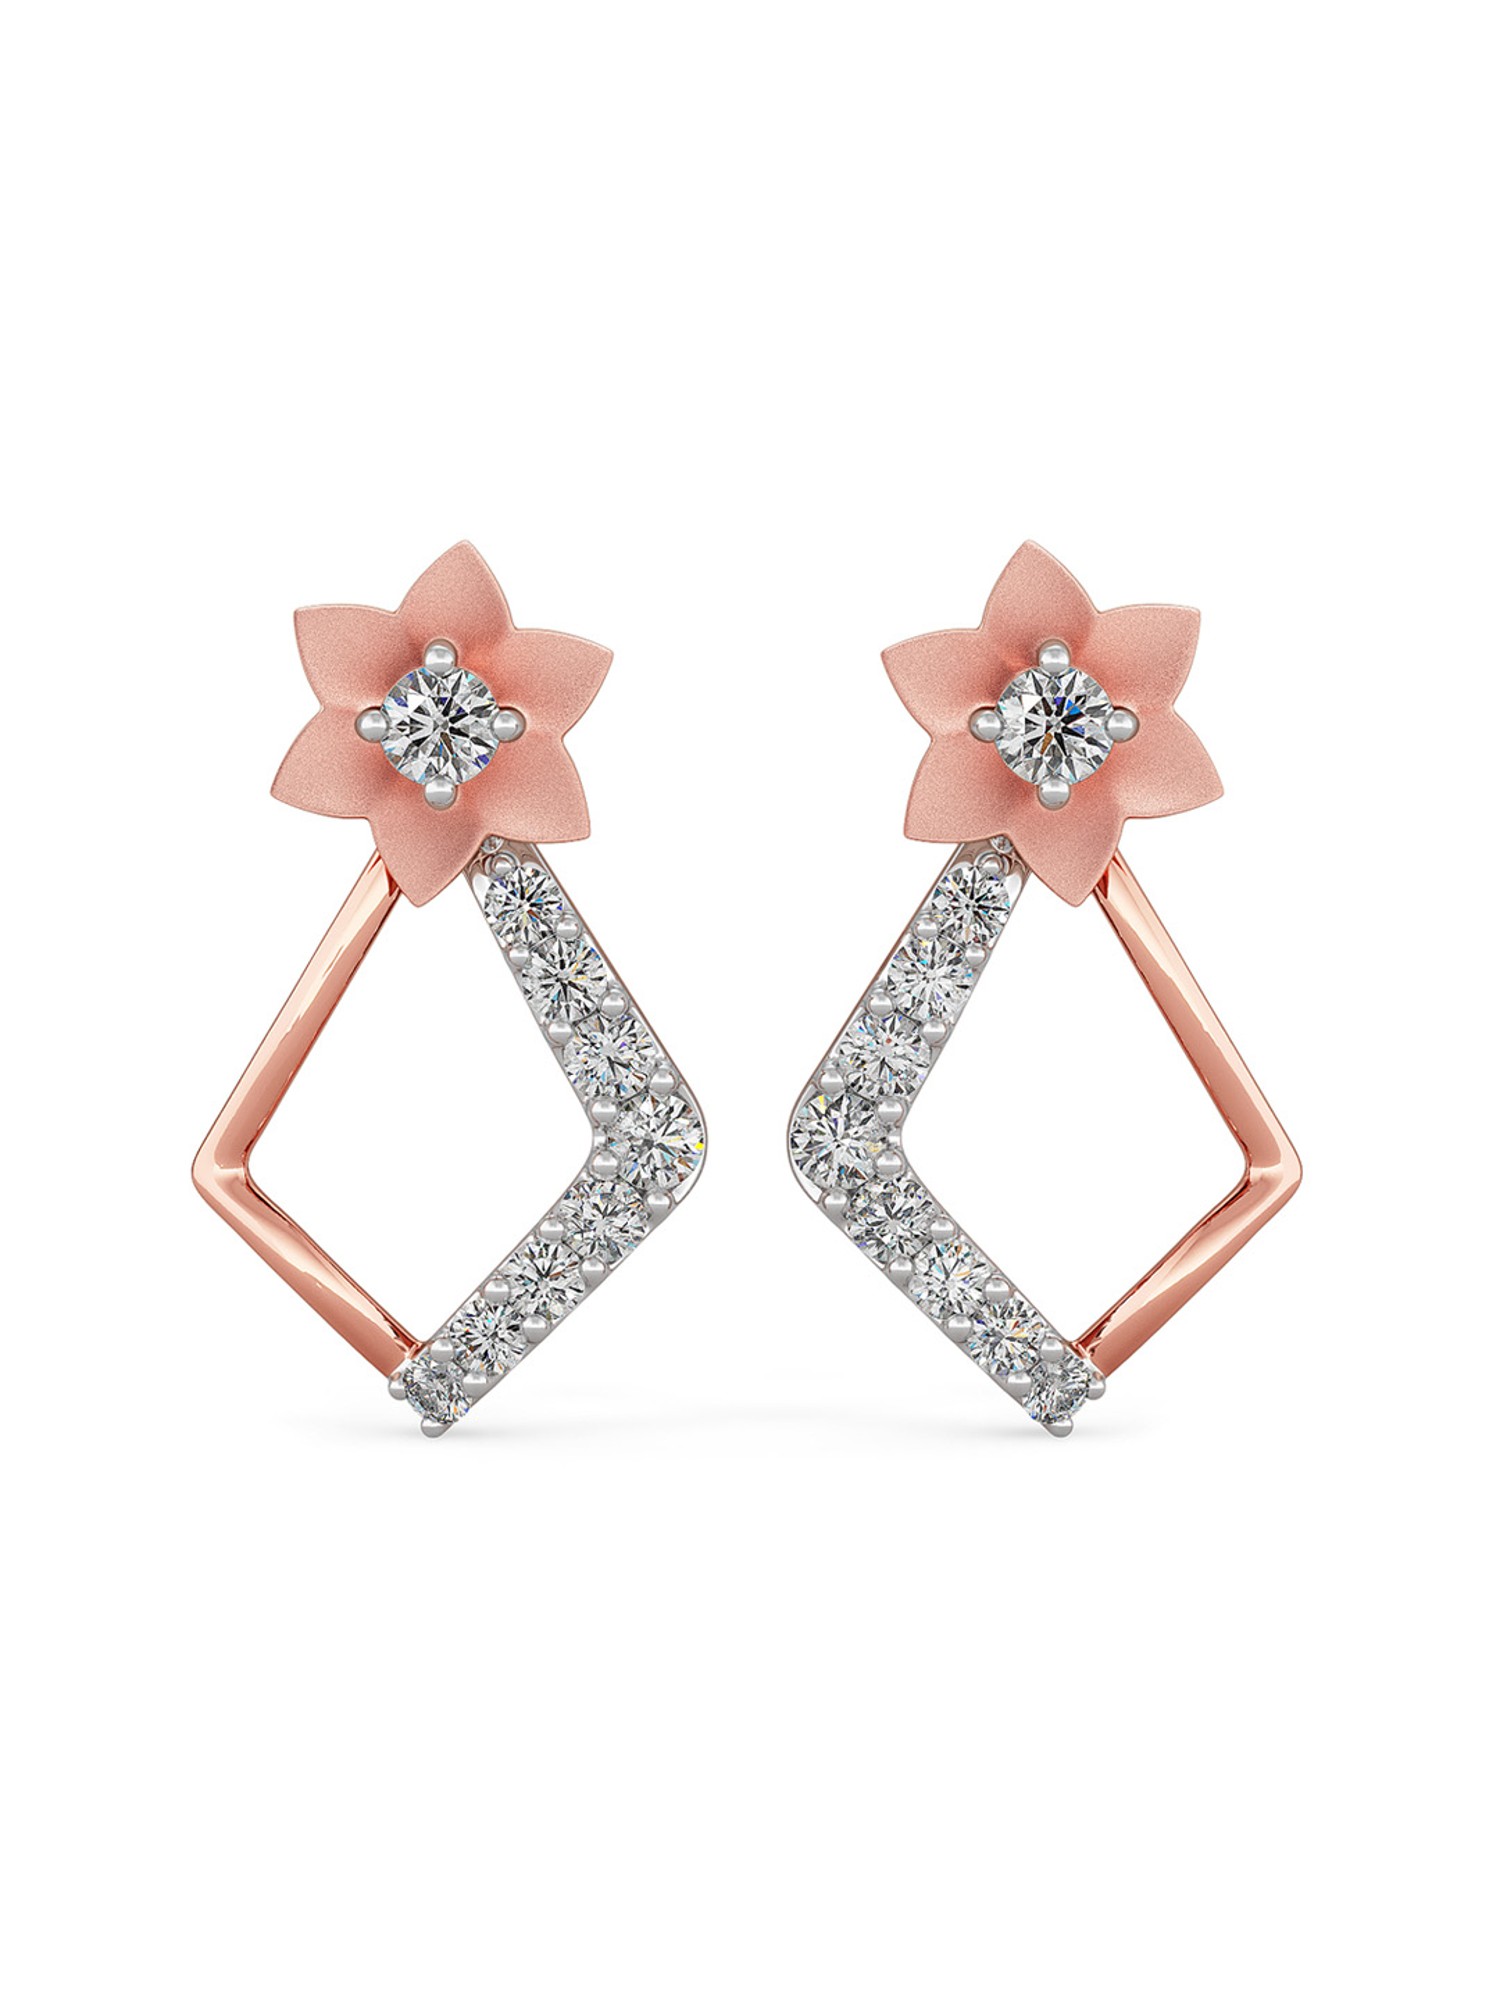 Lab Grown Diamond Earrings - Gold Diamond Studs | Ana Luisa | Online  Jewelry Store At Prices You'll Love